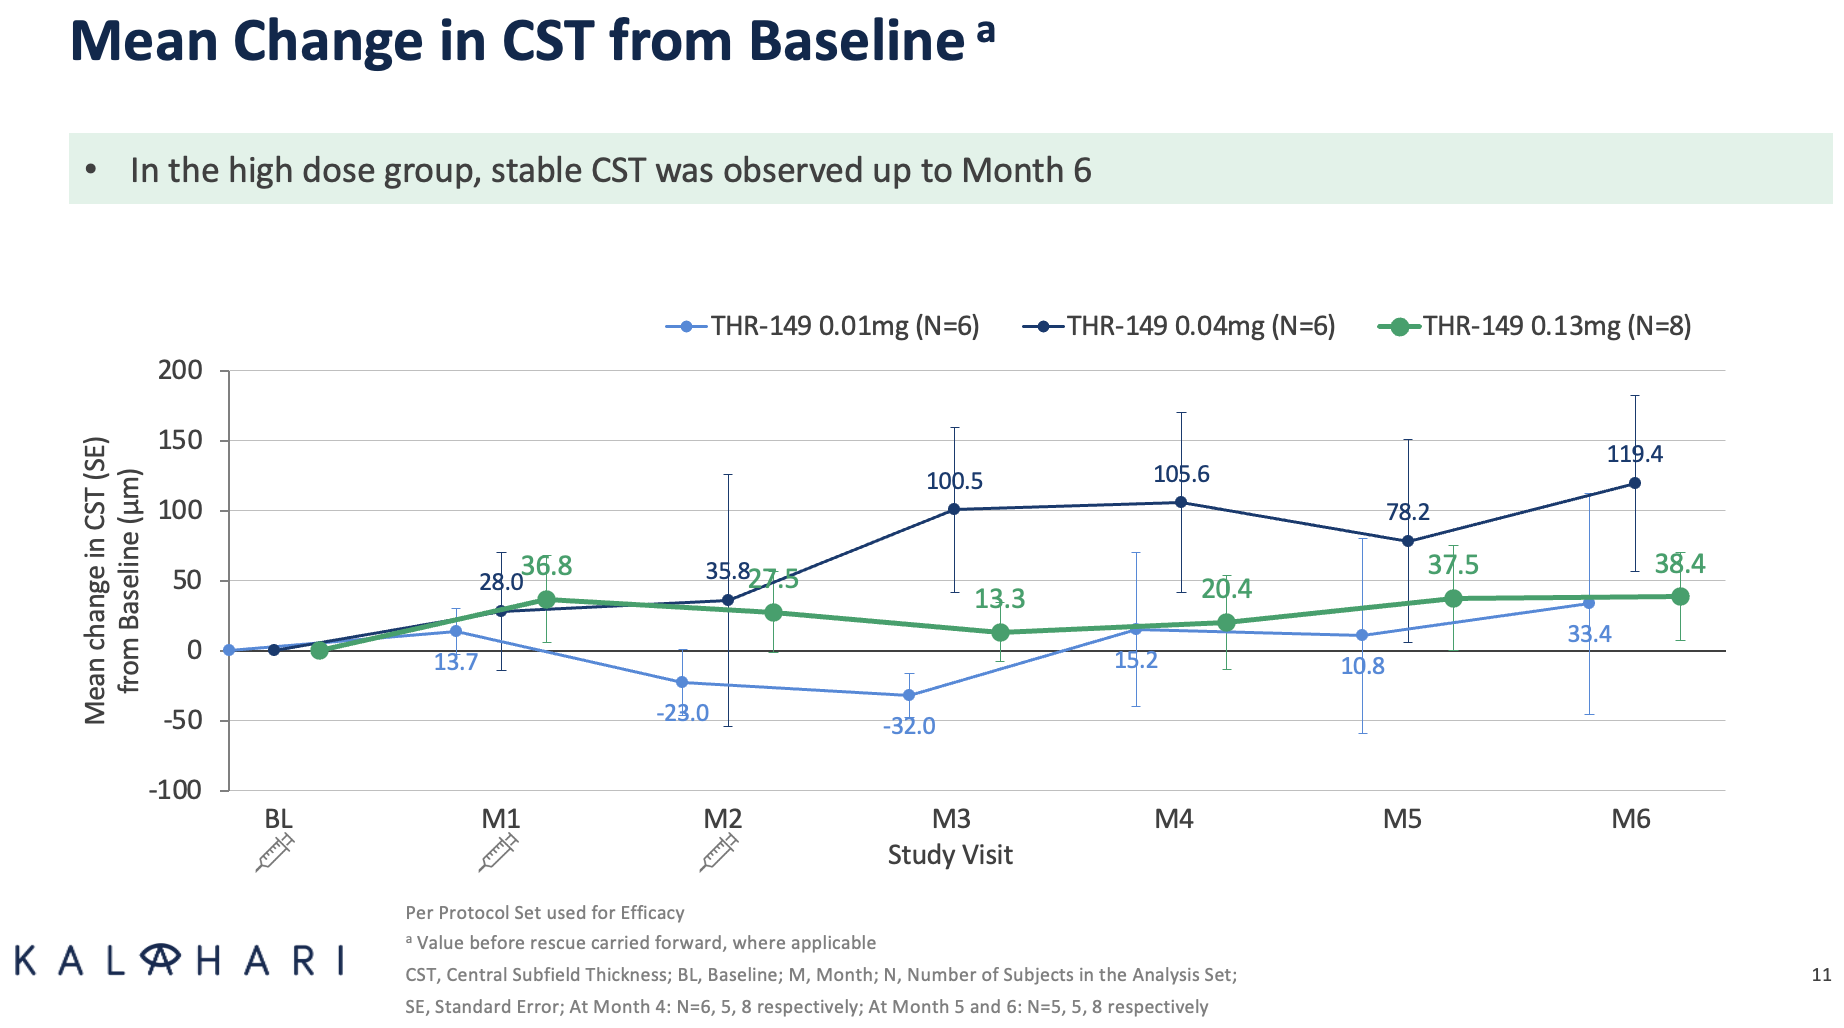 Mean change in CST from baseline KALAHARI study